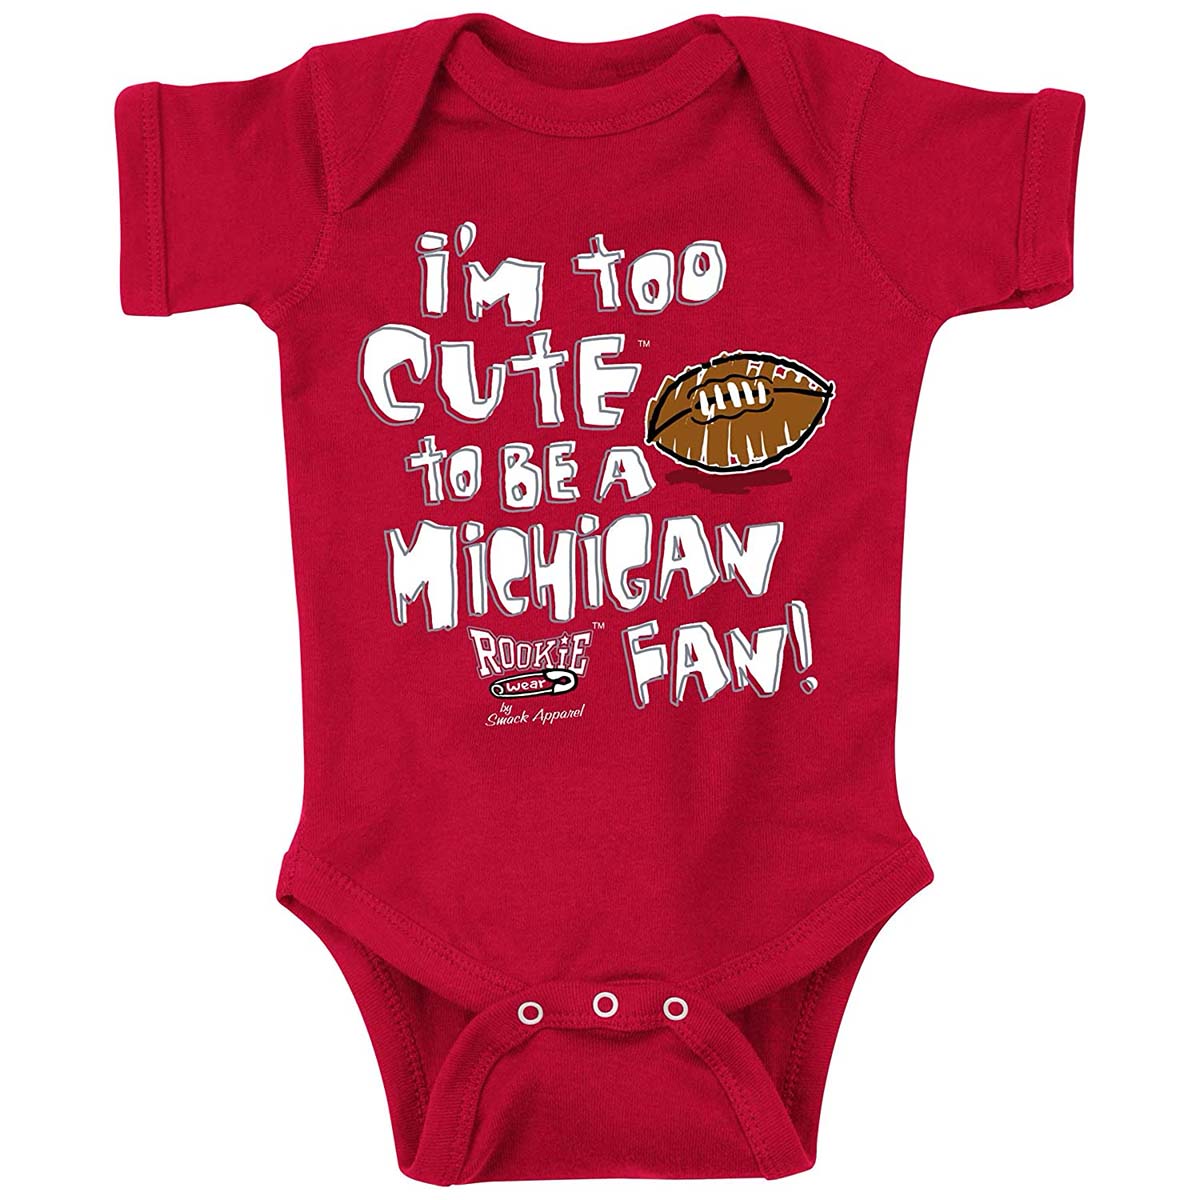 I am to cute to be a michigan fan onsie